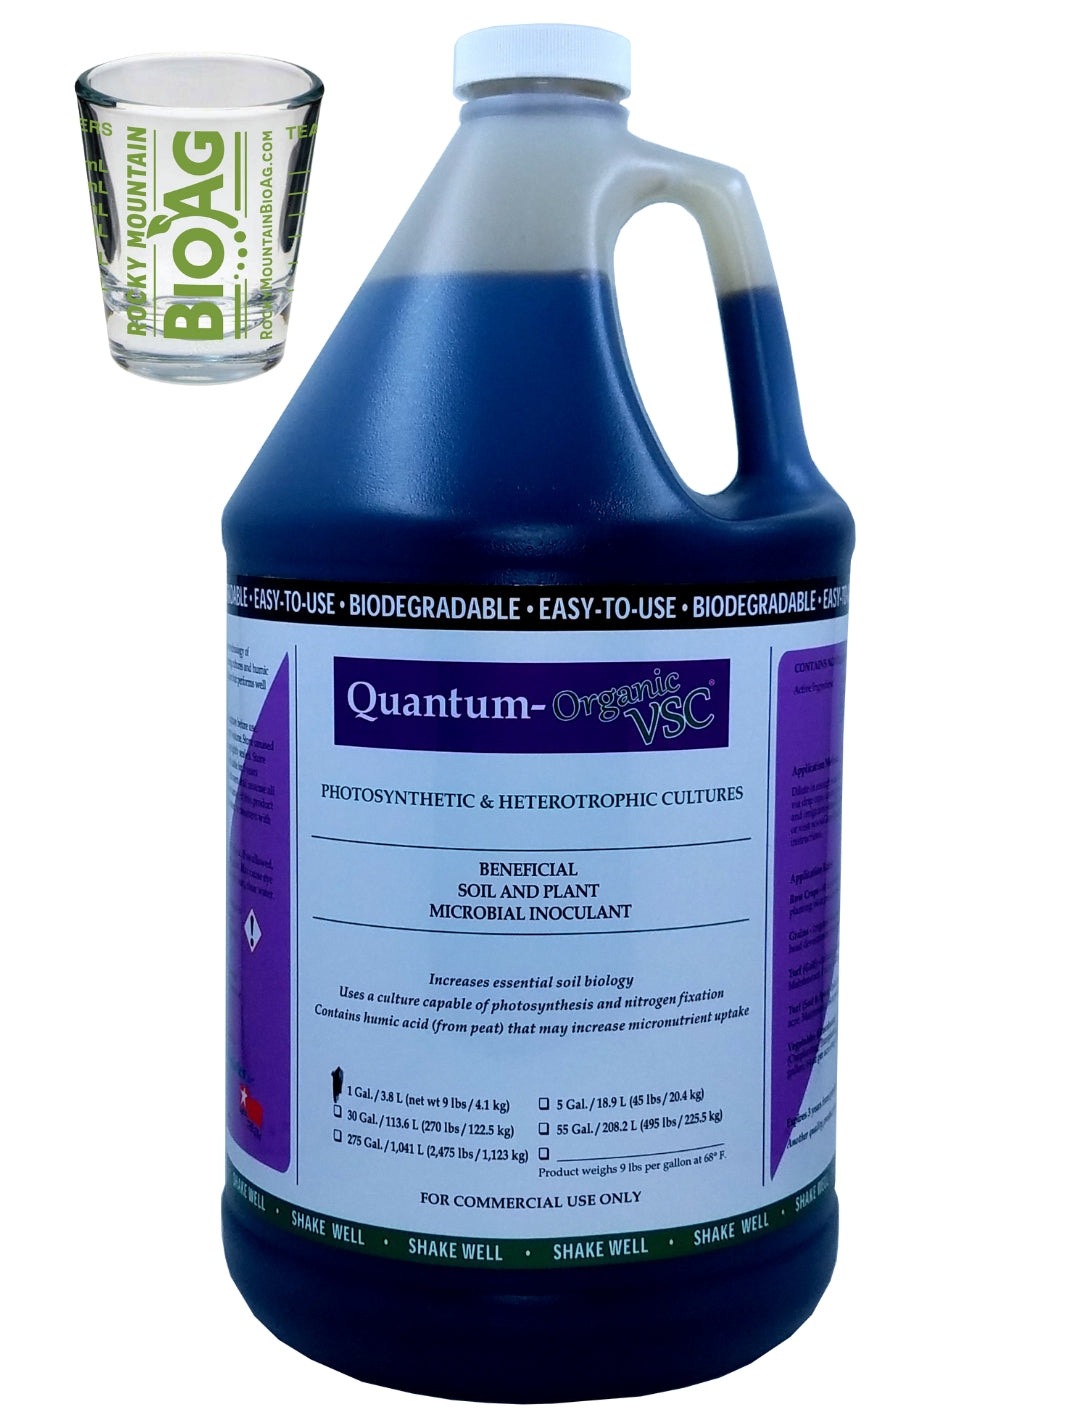 Quantum Grtowth Organic VSC soil biological inoculant in 1 Gallon Bottle With Rocky Mountain BioAg Measuring Shot Glass